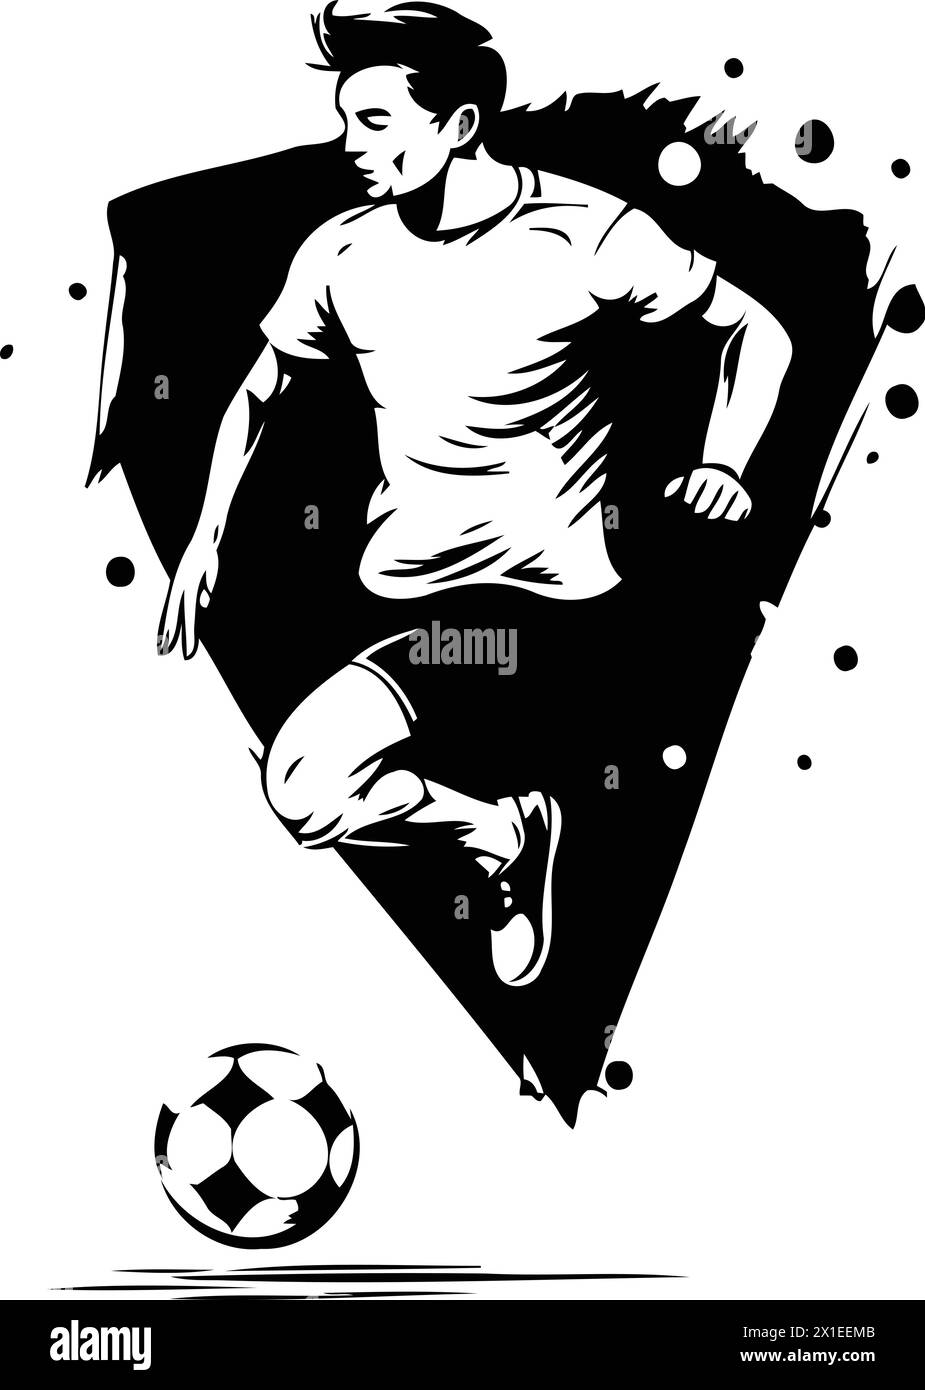 Soccer player kicking the ball. vector illustration in retro style. Stock Vector